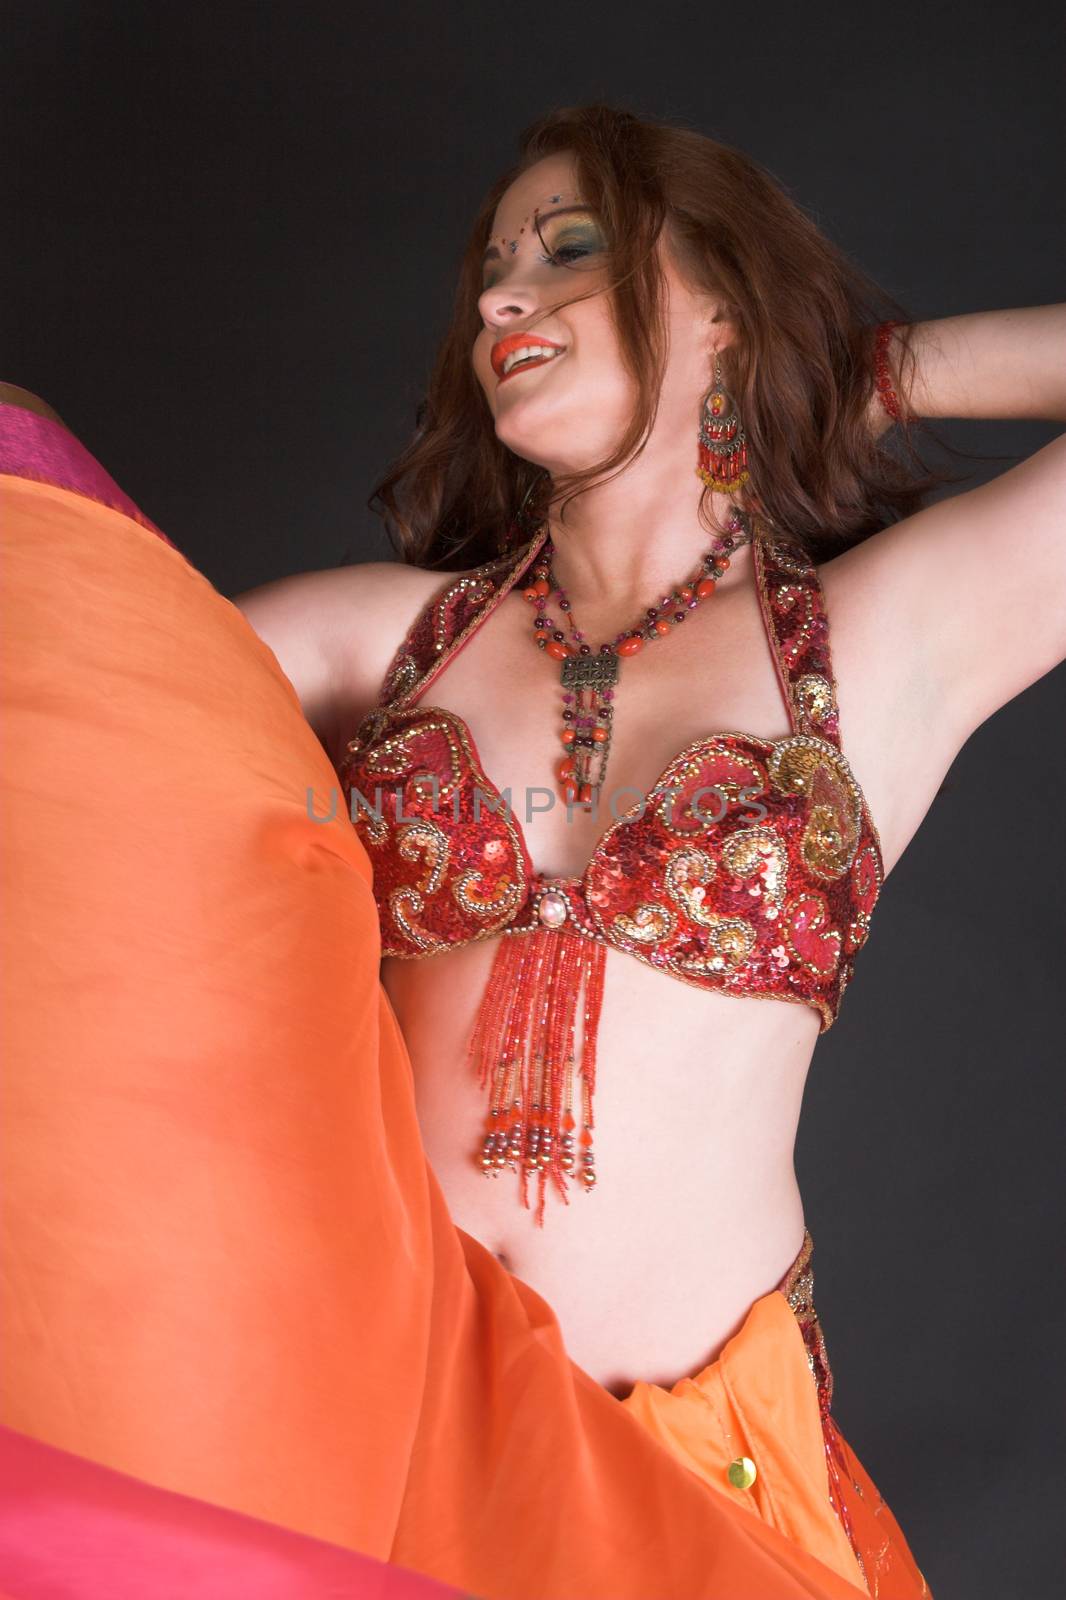 Belly Dancer in Red by carlush